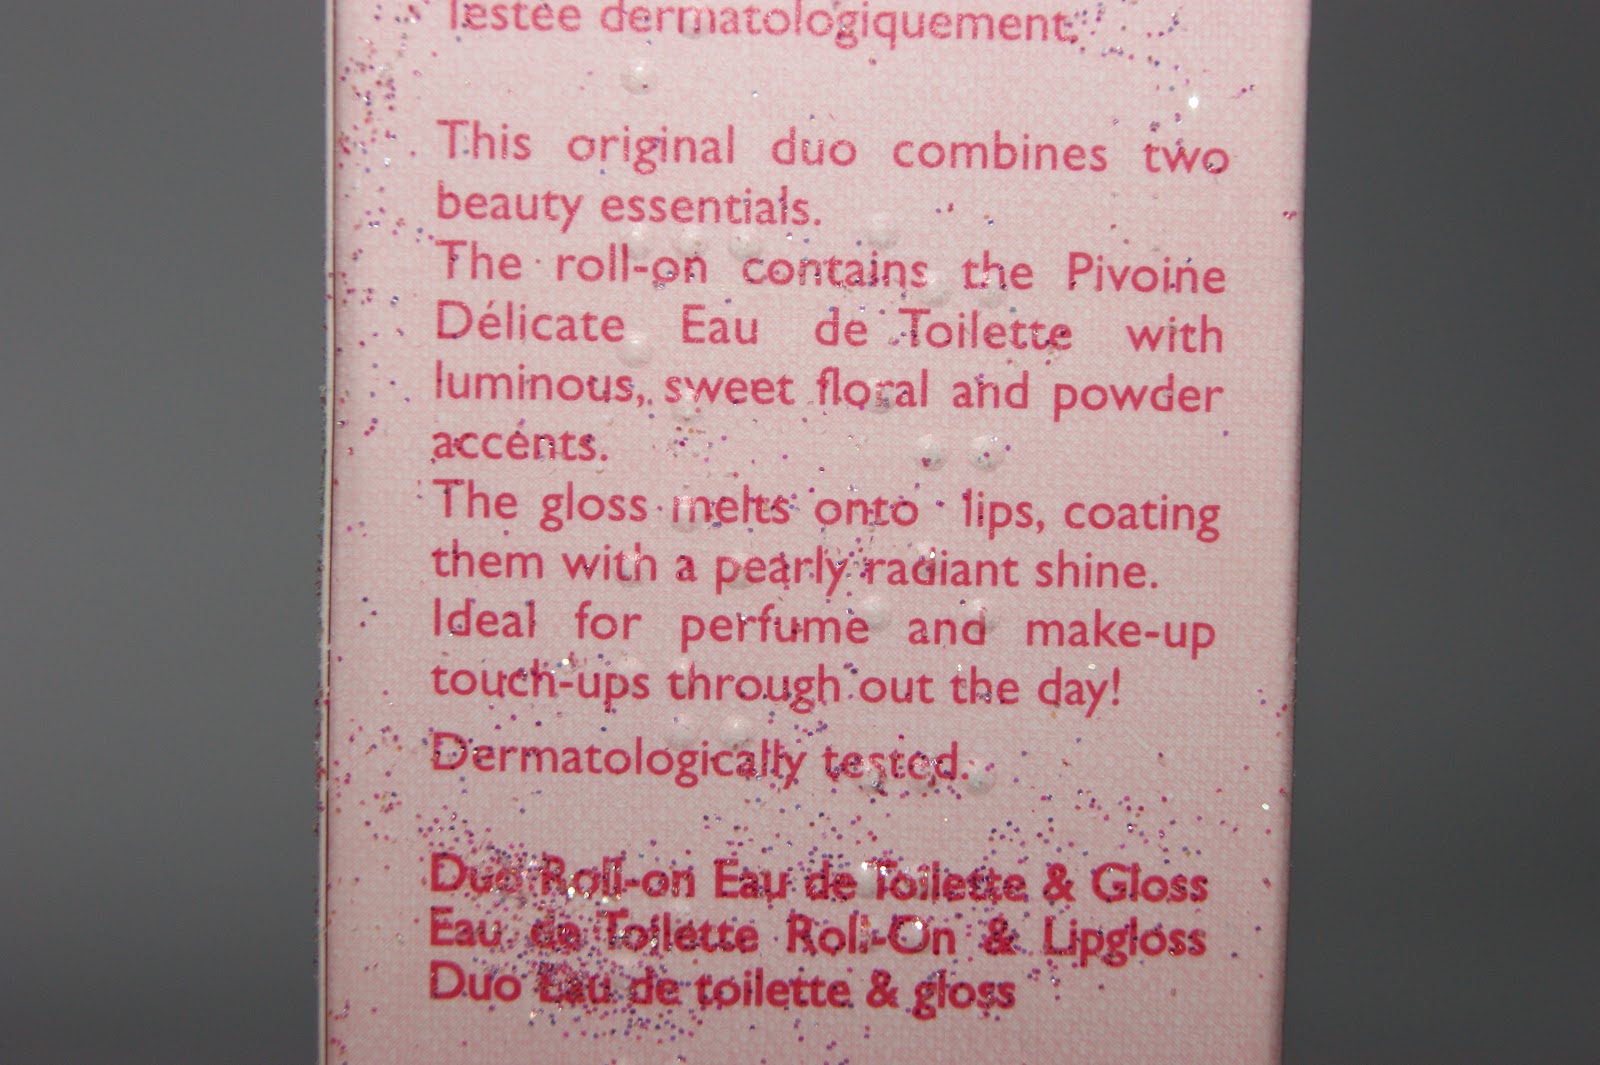 L'Occitane Pivoine Delicate EDT and Gloss Duo - Review | The Sunday Girl